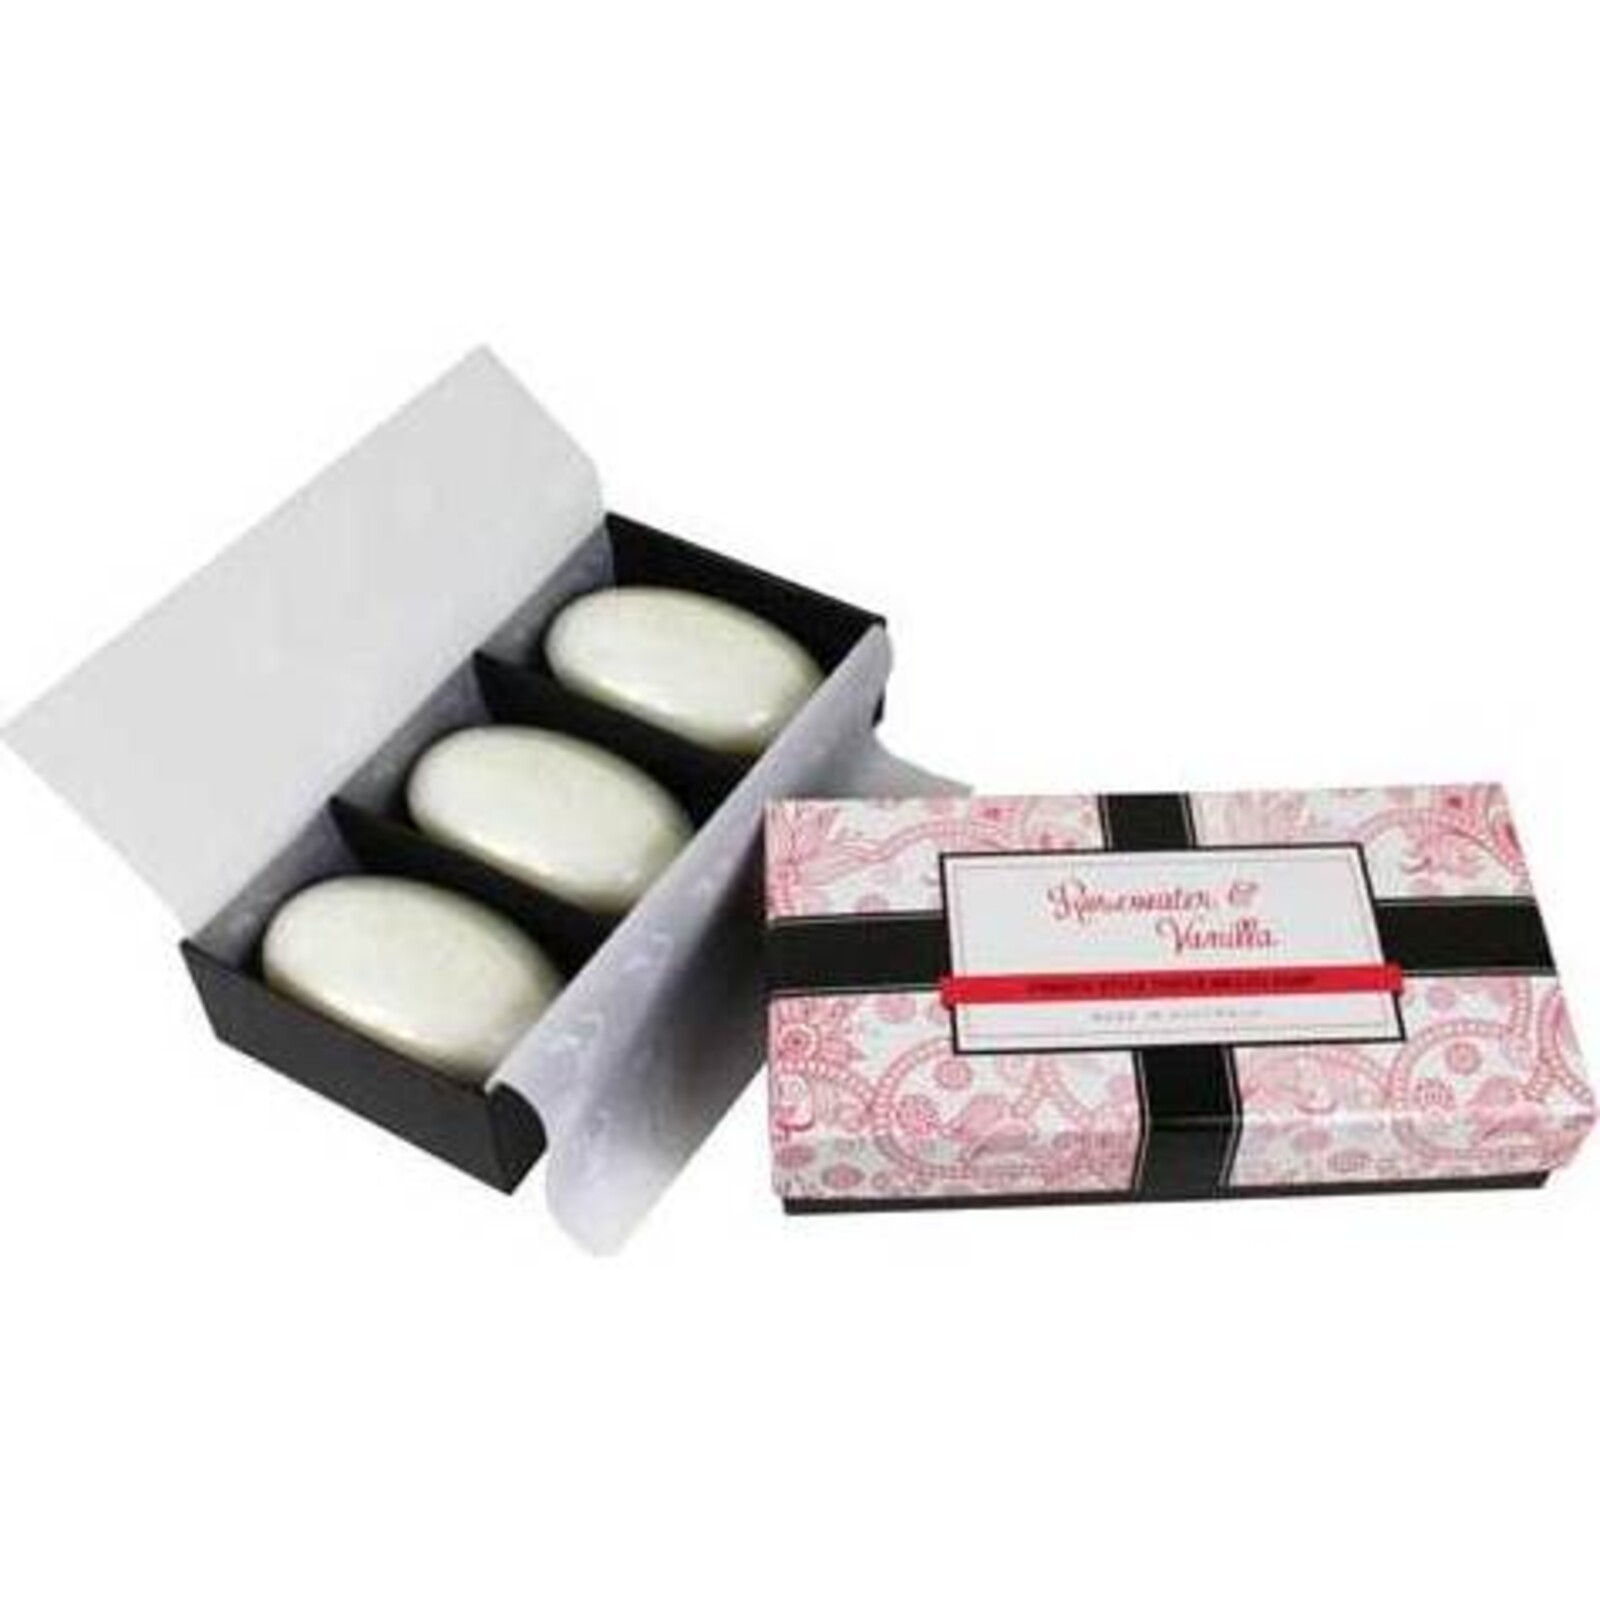 Rosewater and Vanilla Boxed Soap  S/3 